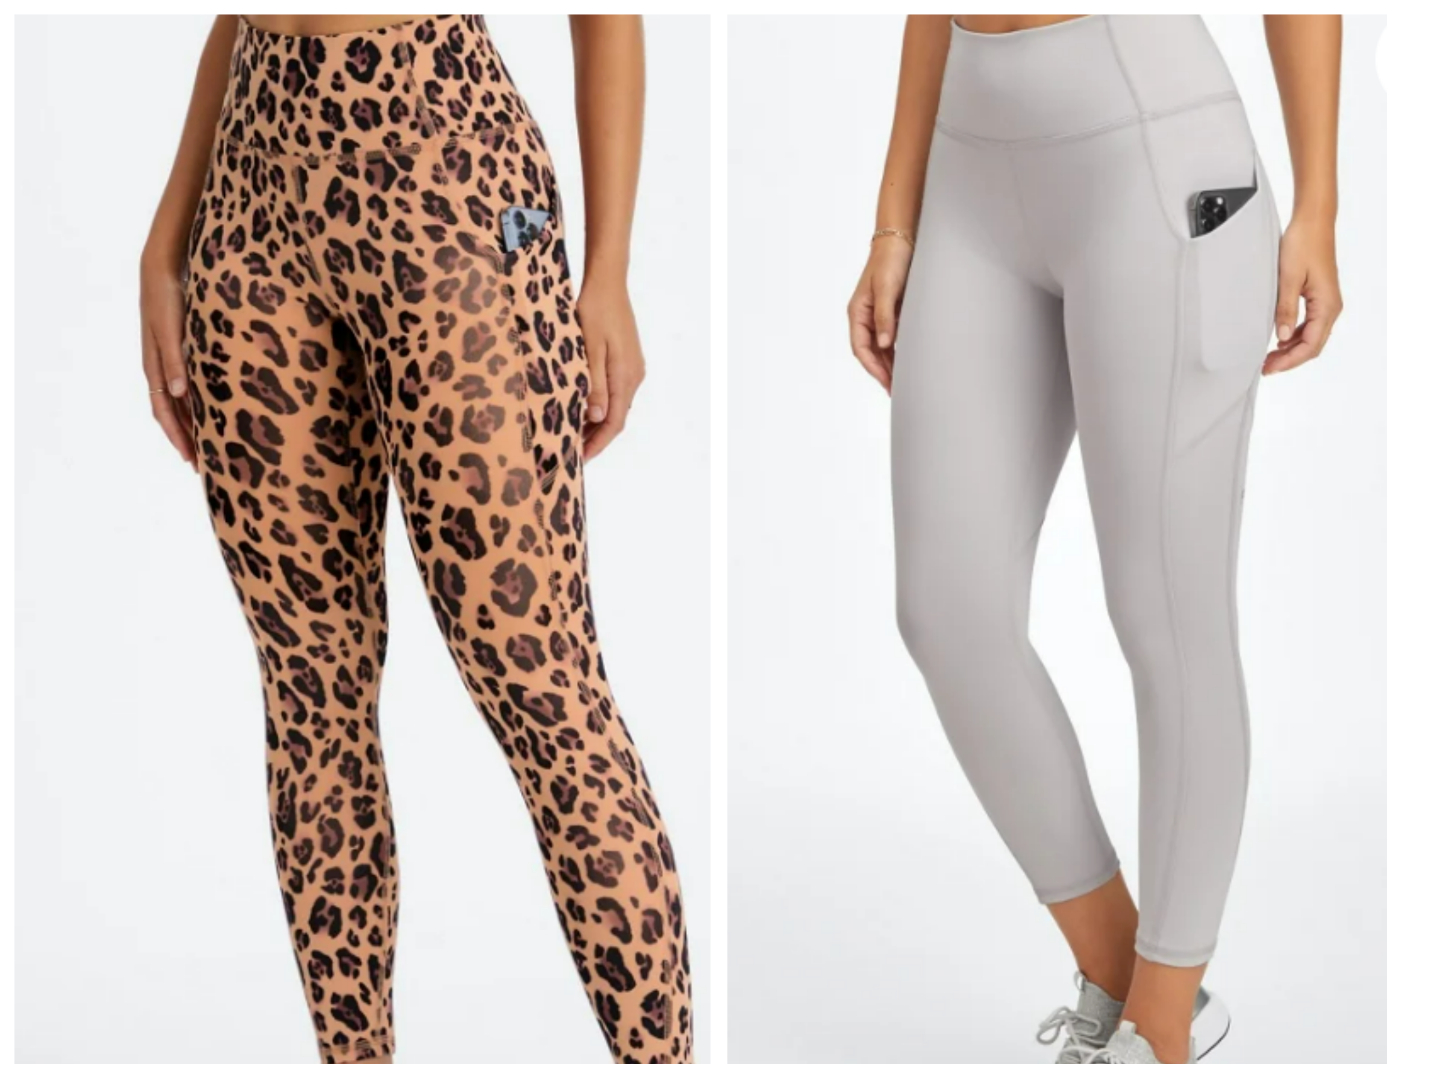 Fabletics leggings on sale for $24, buy one get one free 